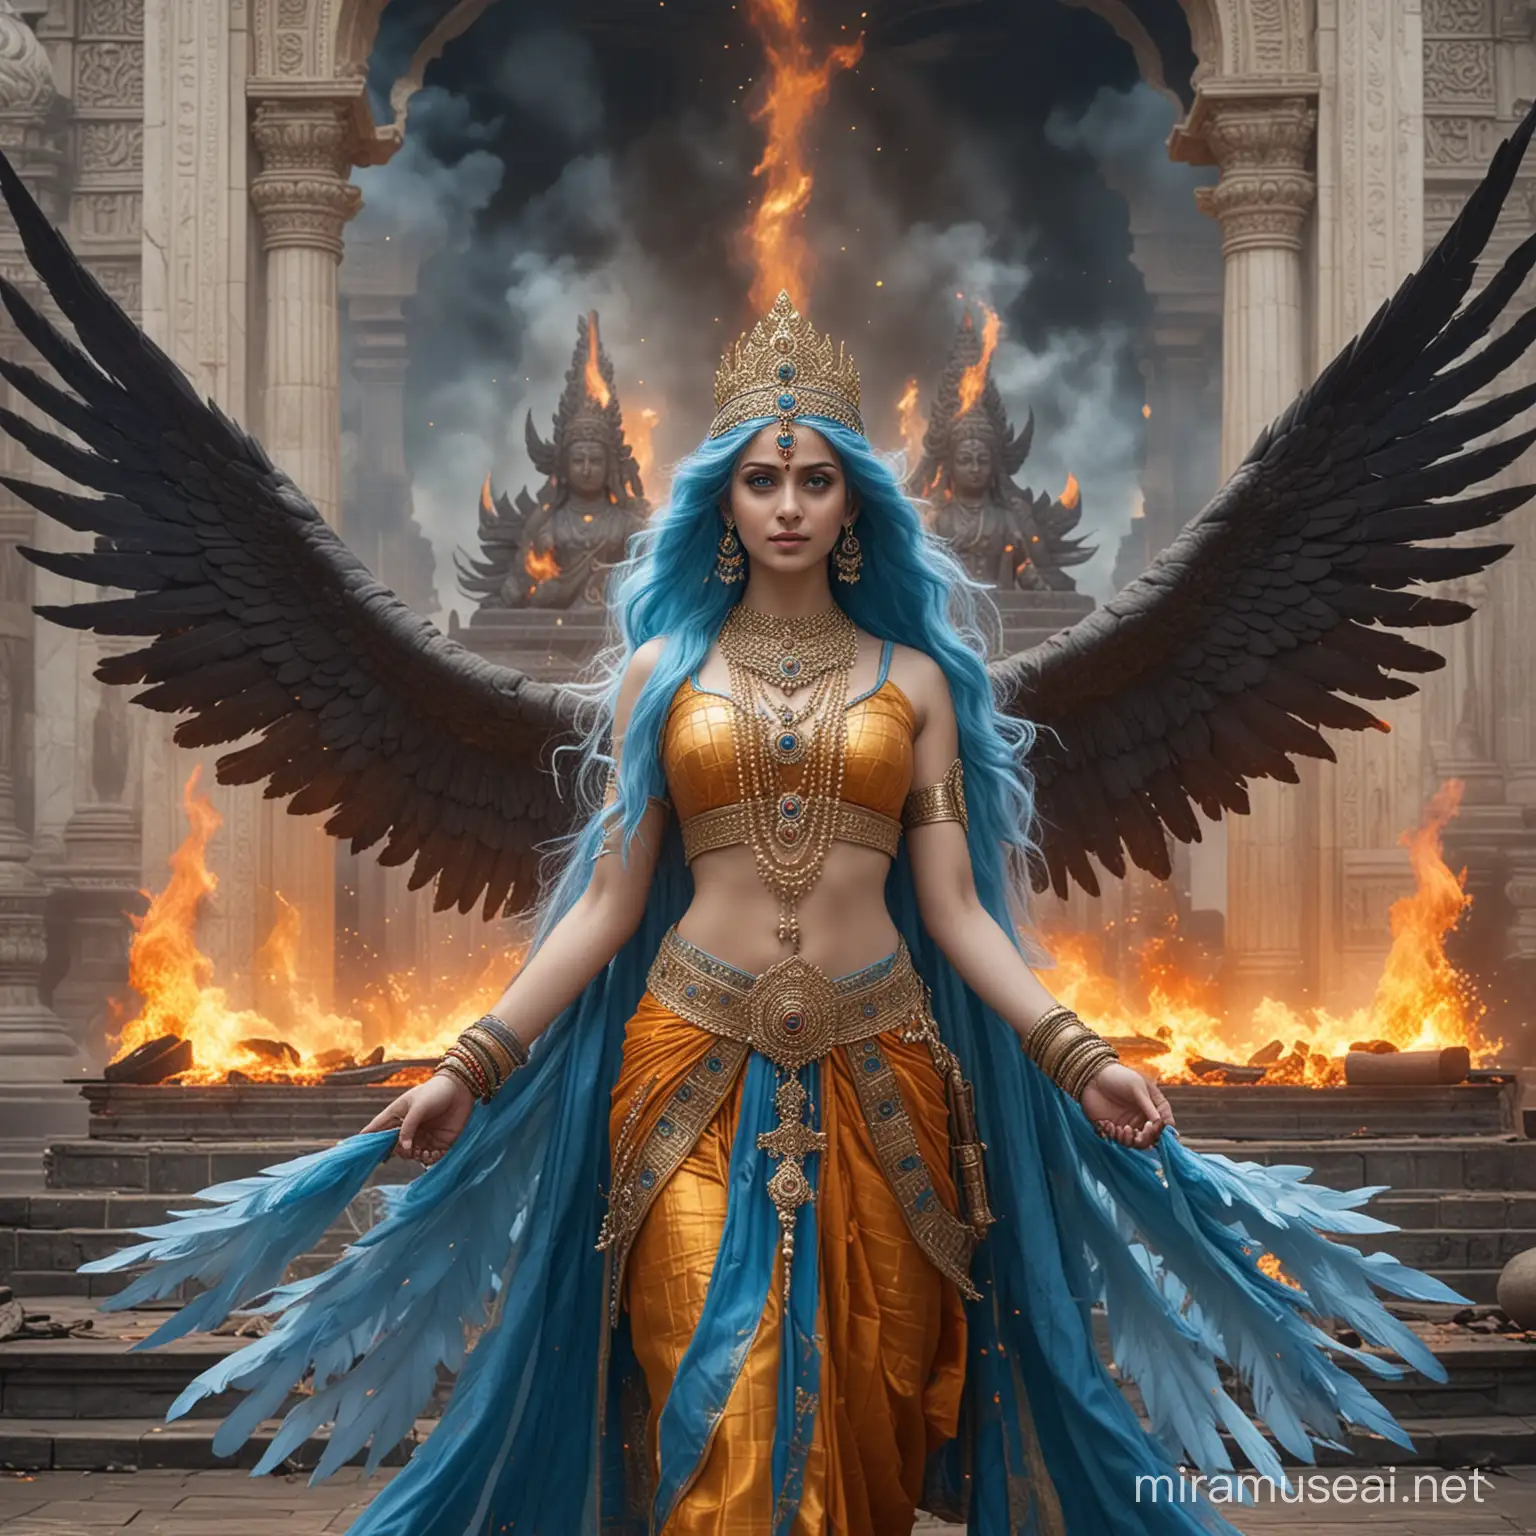 Majestic Hindu Empress Surrounded by Divine Fire and Power